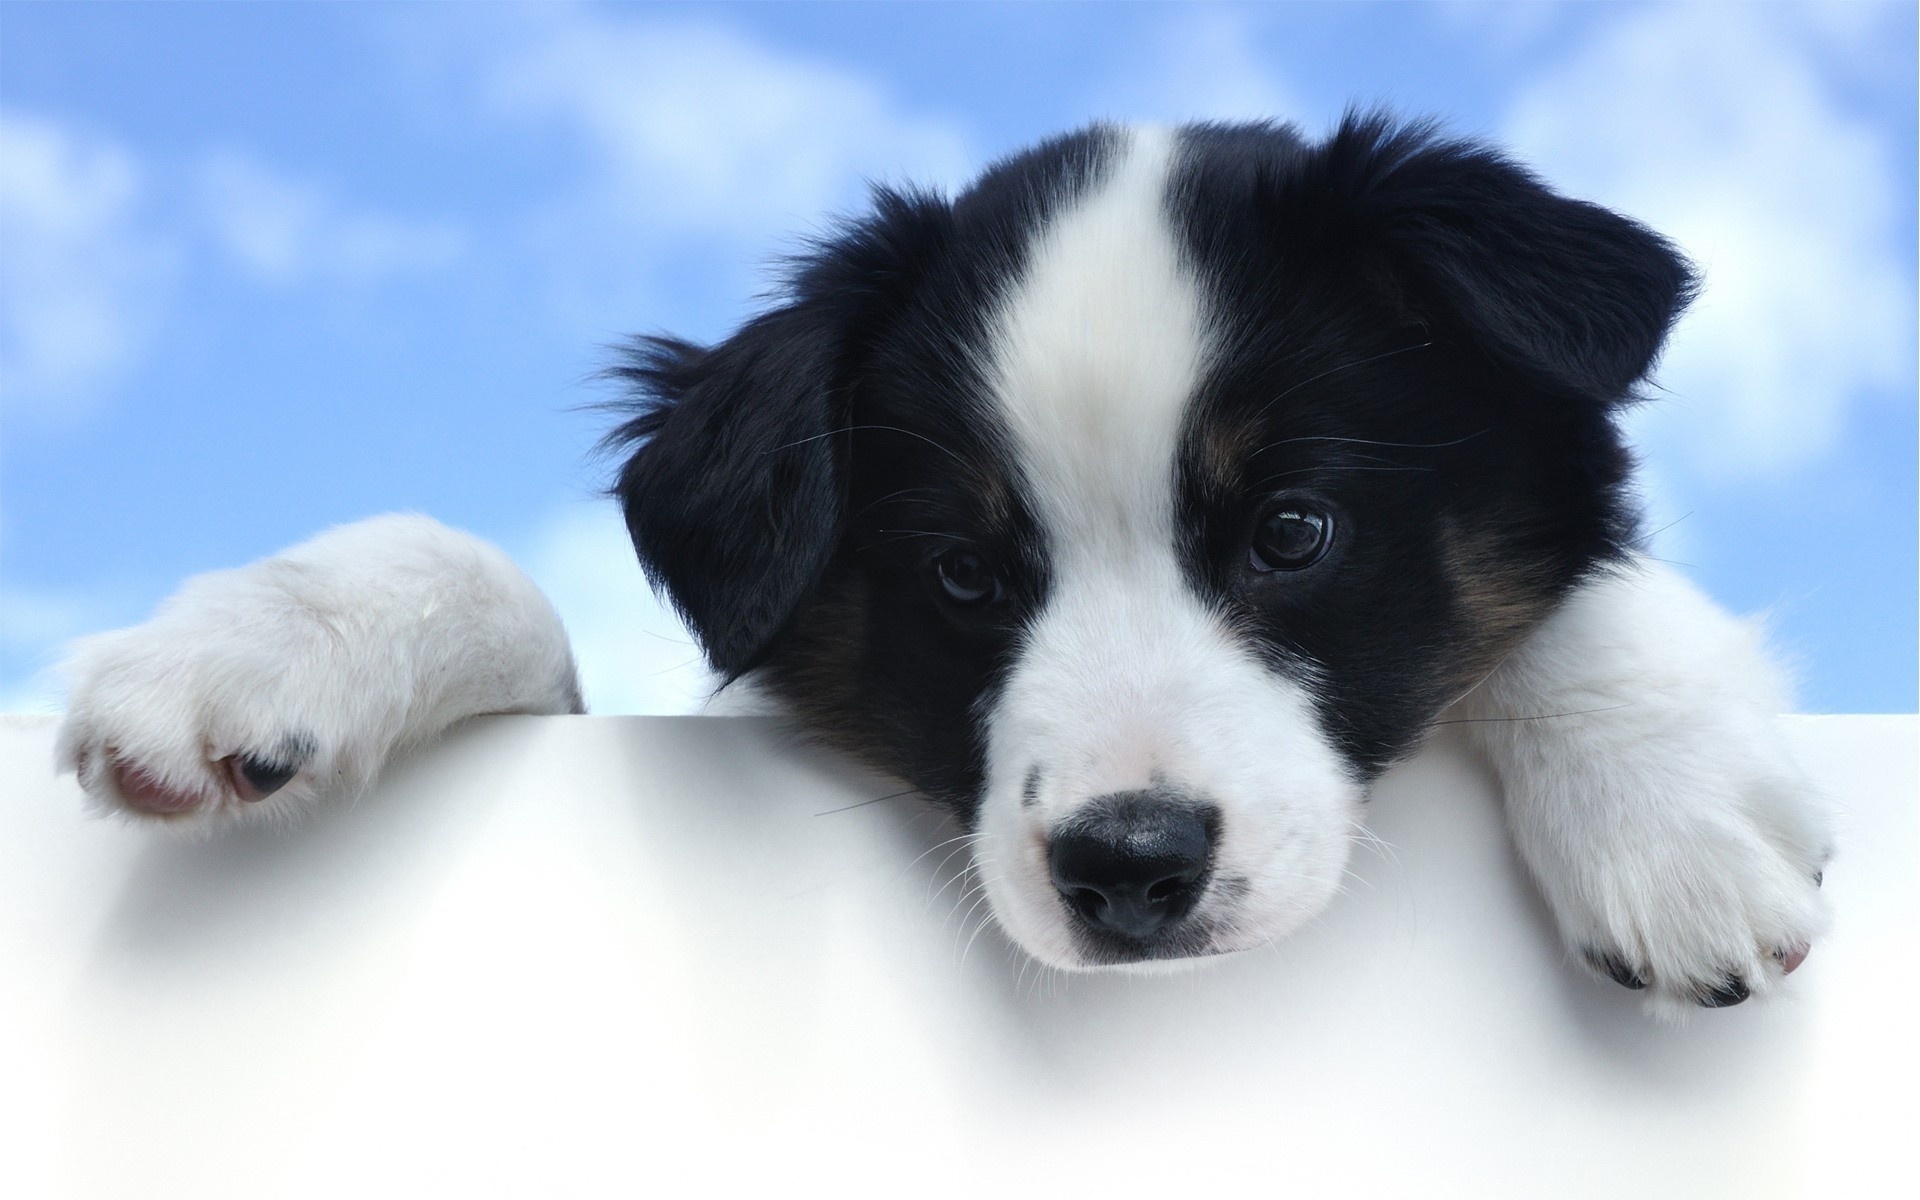 dogs, border collie, animal, cute, puppy